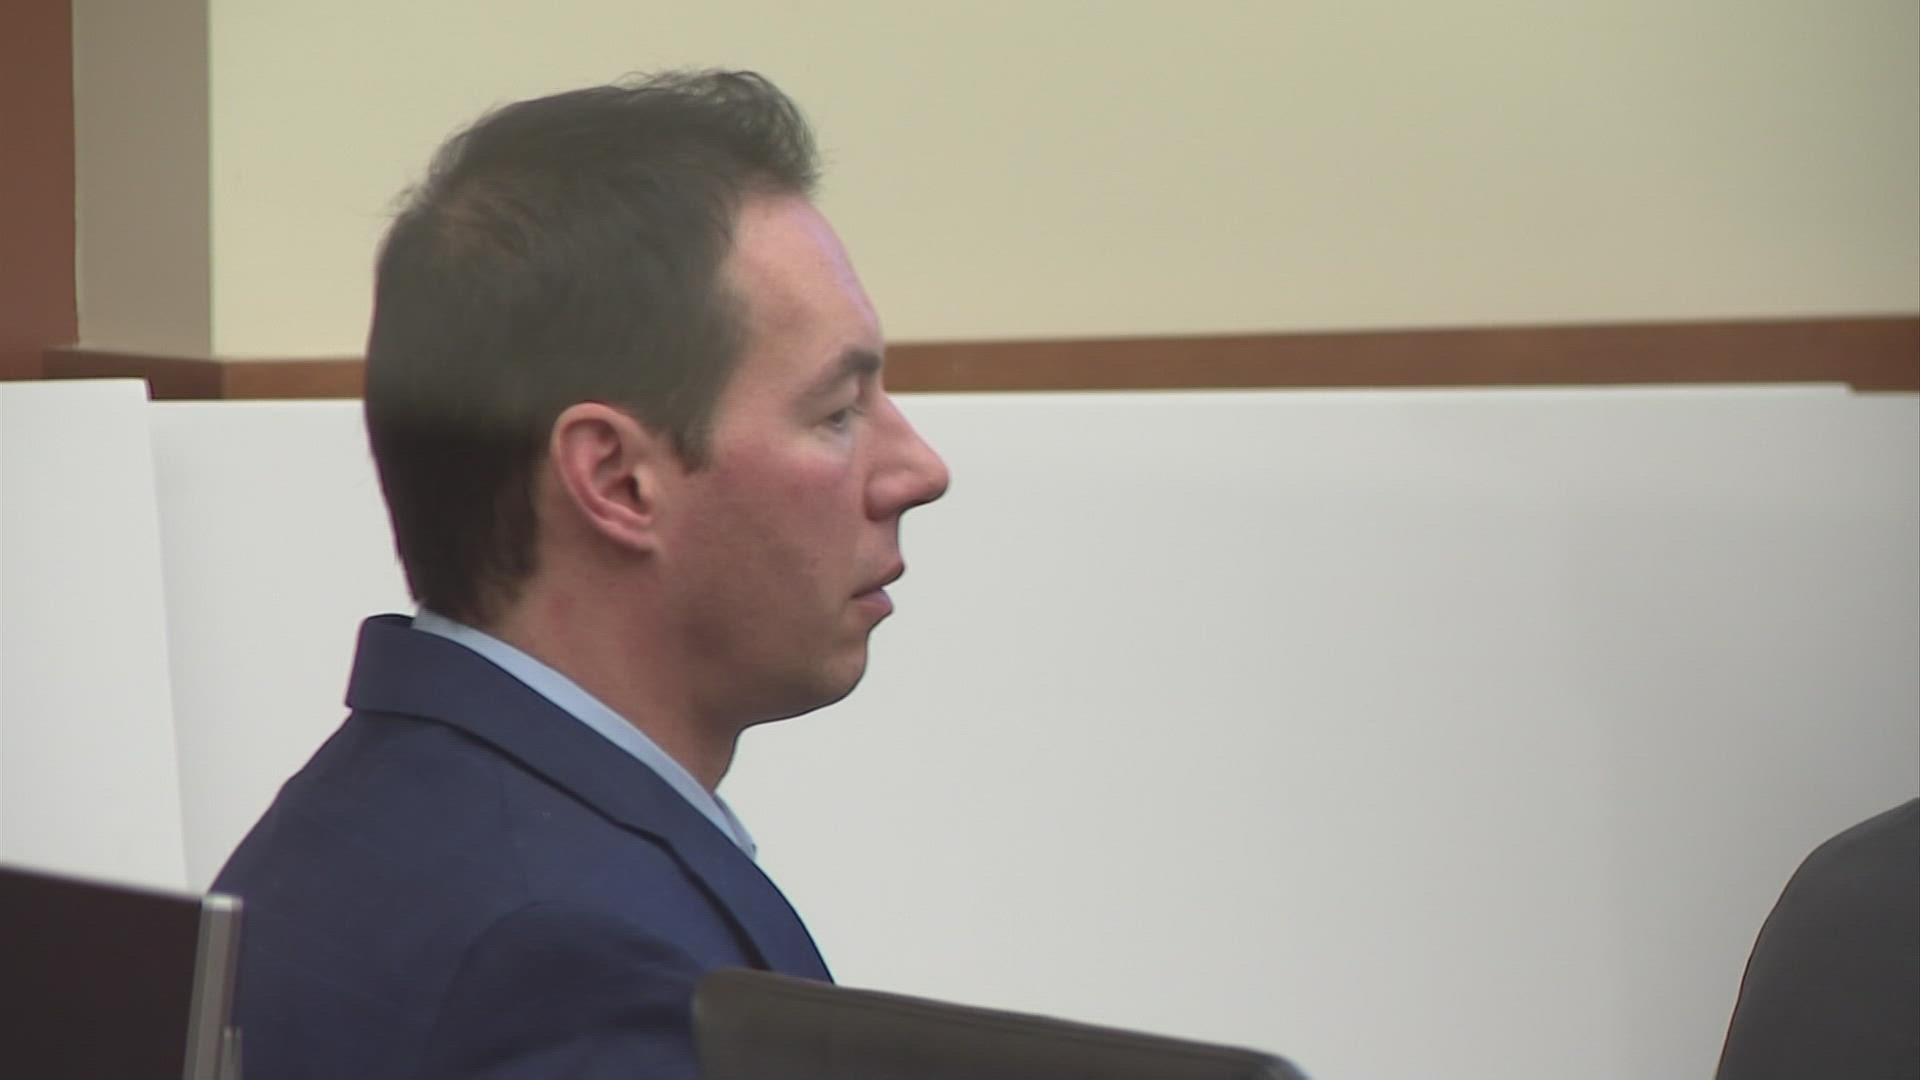 Three of the nurses worked at Mount Carmel with Dr. William Husel, who is accused of ordering deadly dosages of fentanyl and other medication for 14 patients.